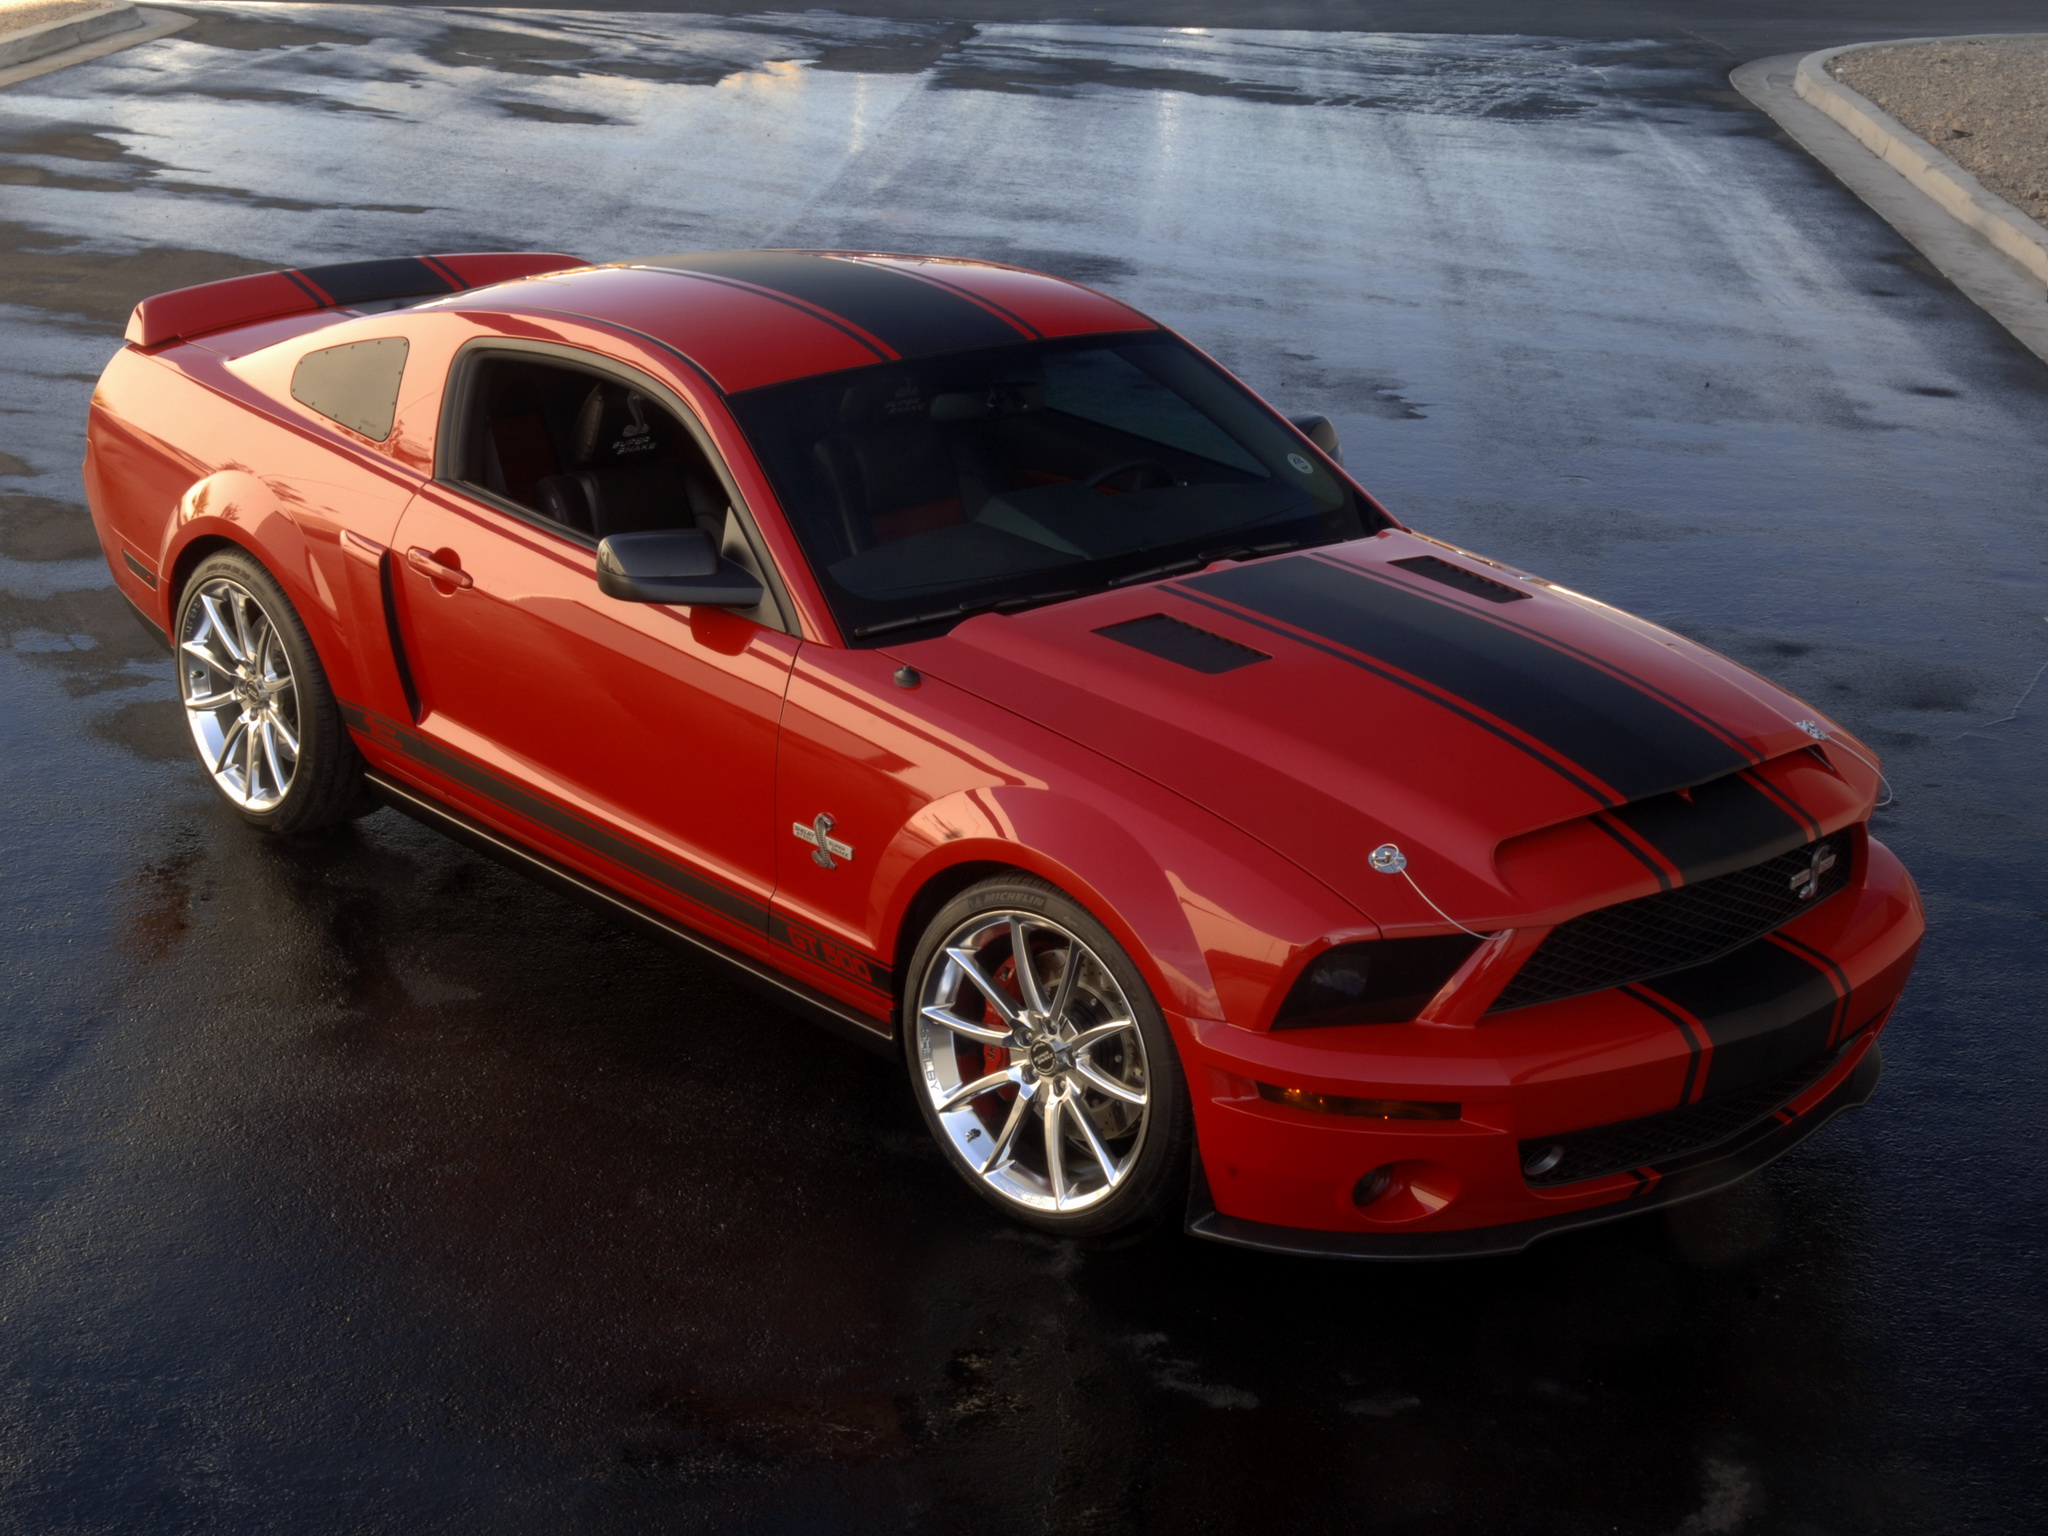 2008, Shelby, Gt500, Super snake, Muscle, Ford, Mustang Wallpaper